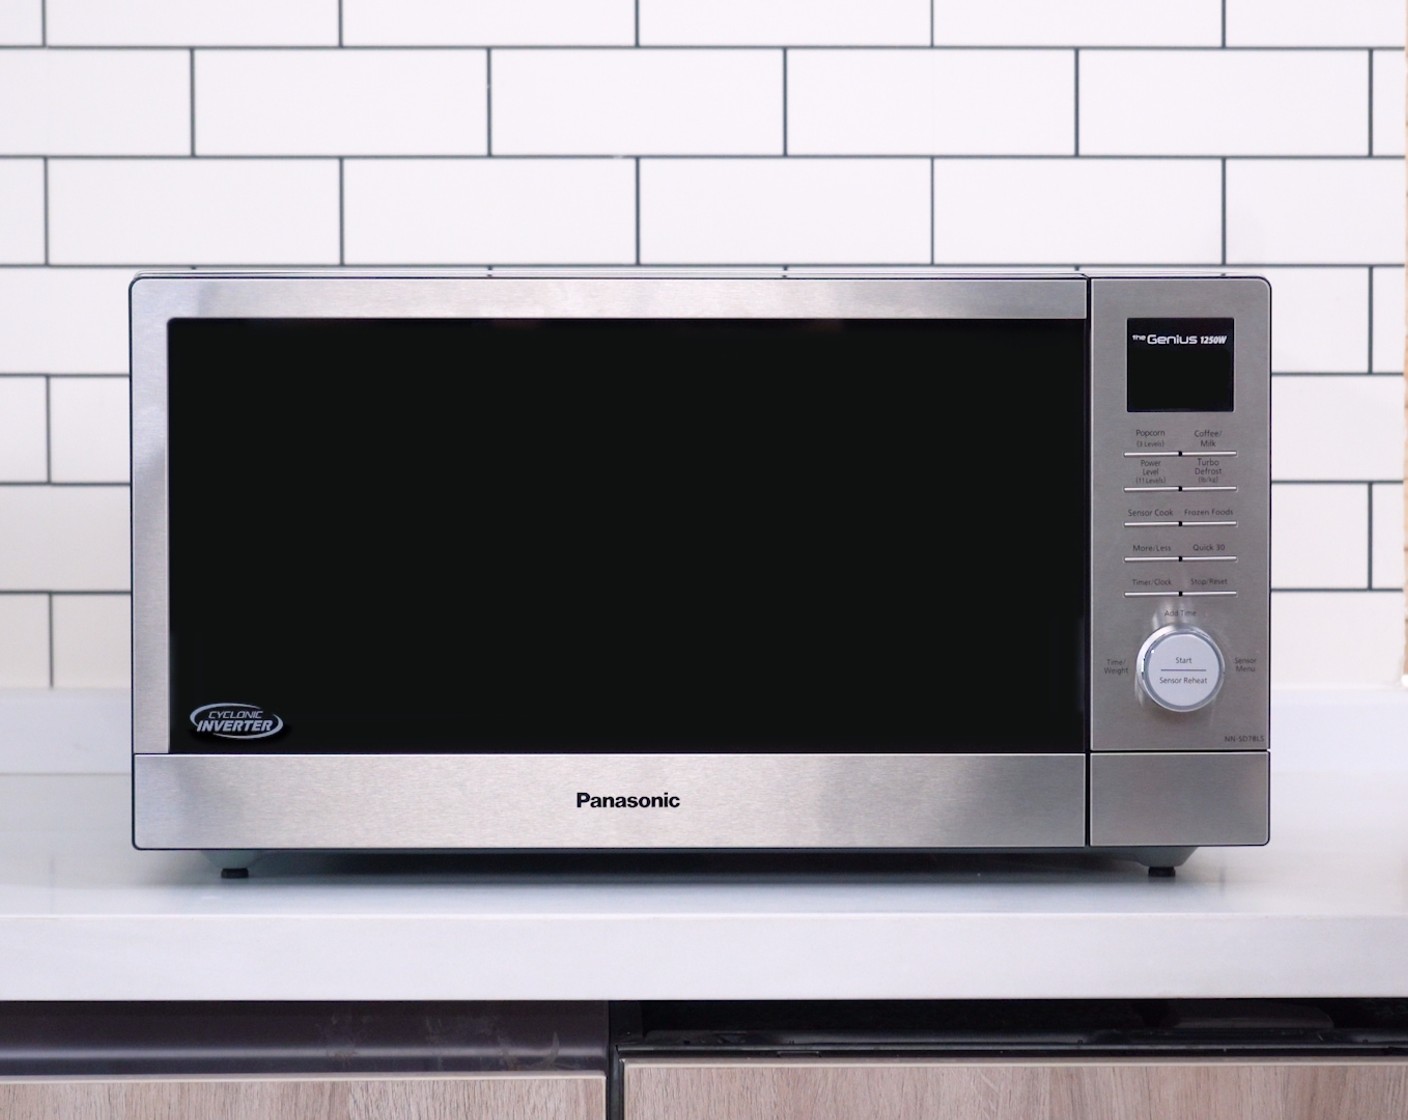 step 3 Cook riced vegetables in the Panasonic Microwave Oven 4-5 minutes in a large microwave-safe bowl.